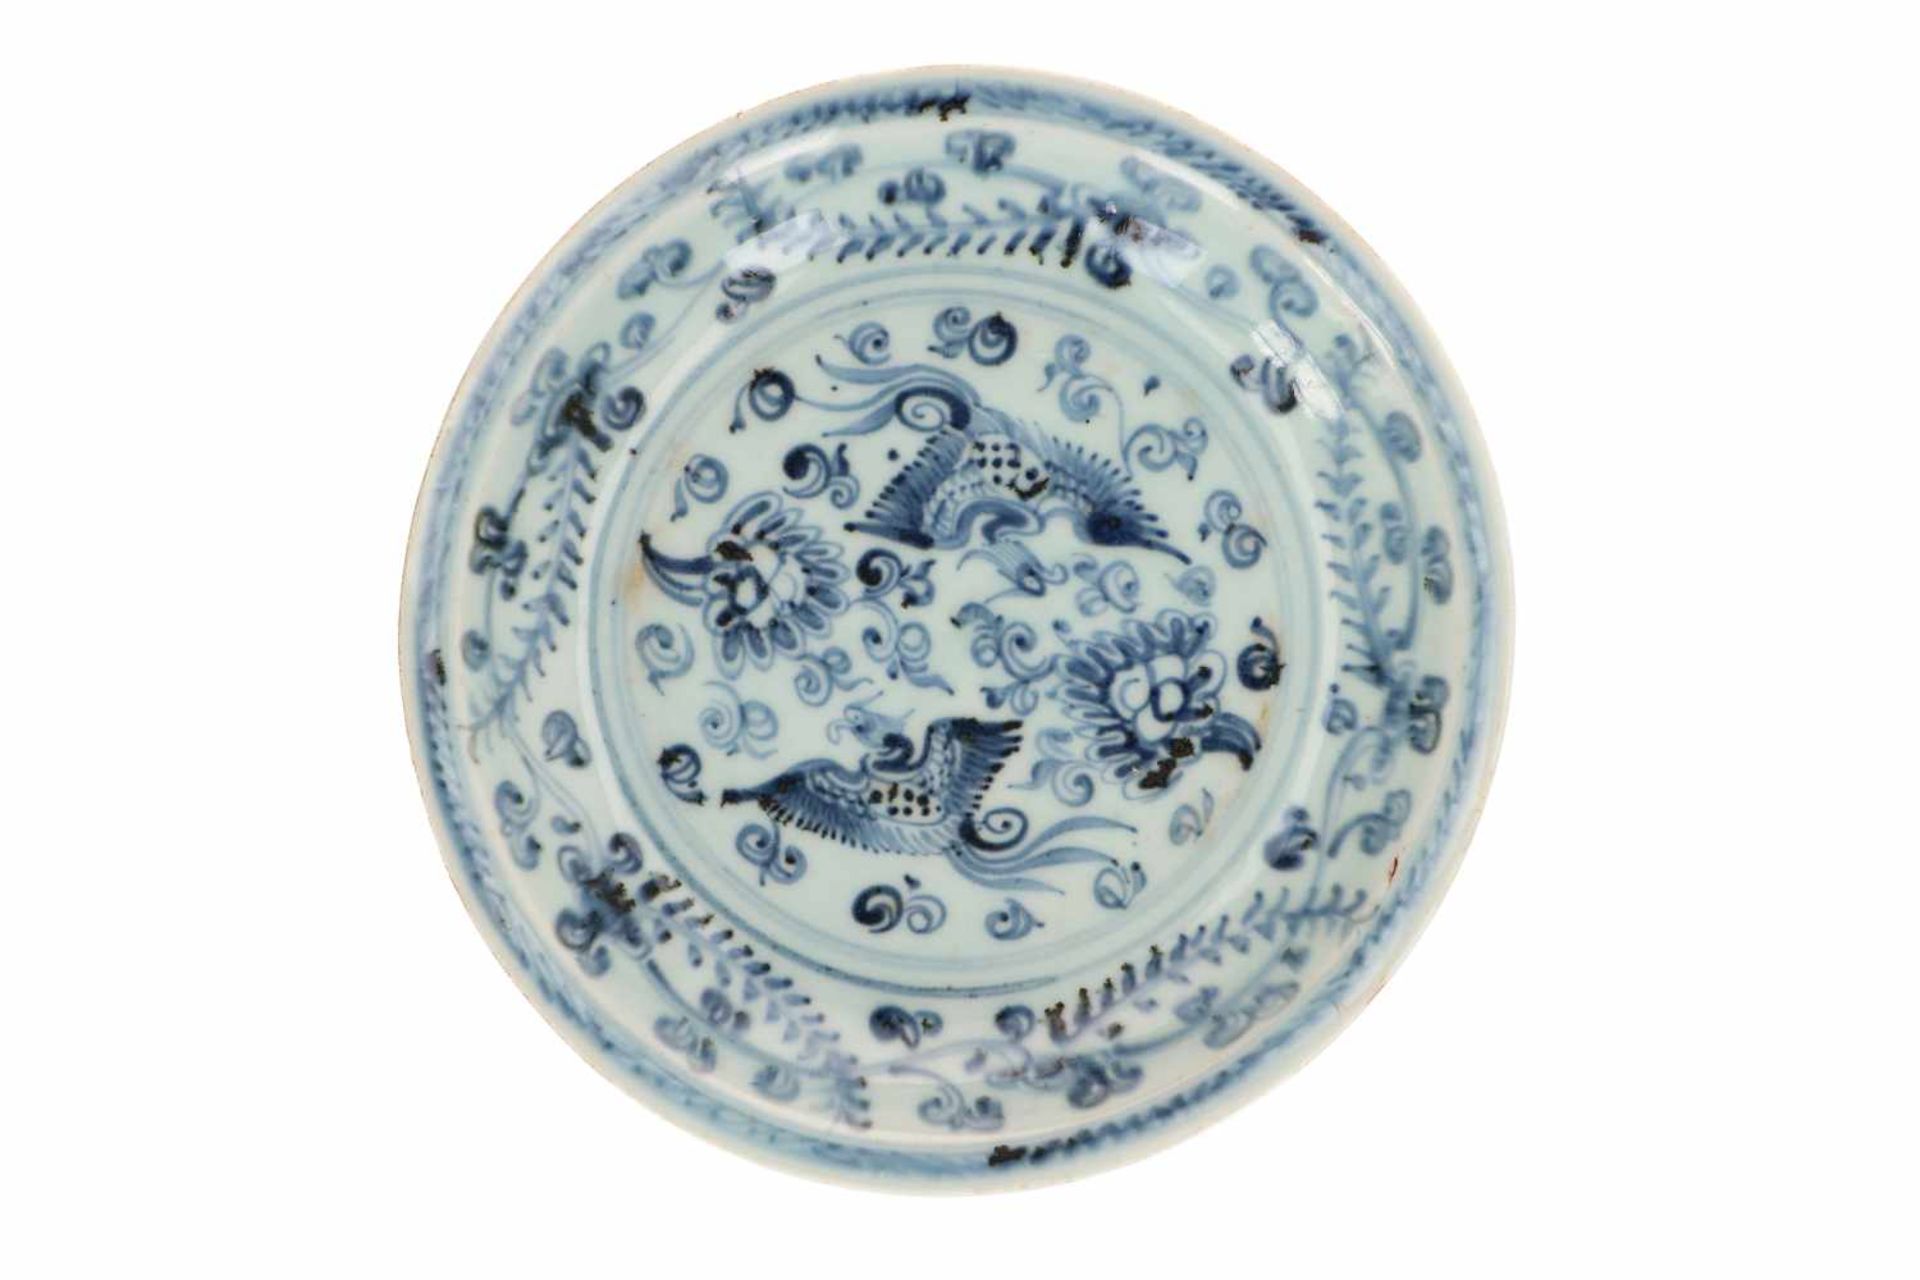 A blue and white porcelain deep dish, decorated with two phoenixes among flowering plants. Unmarked.